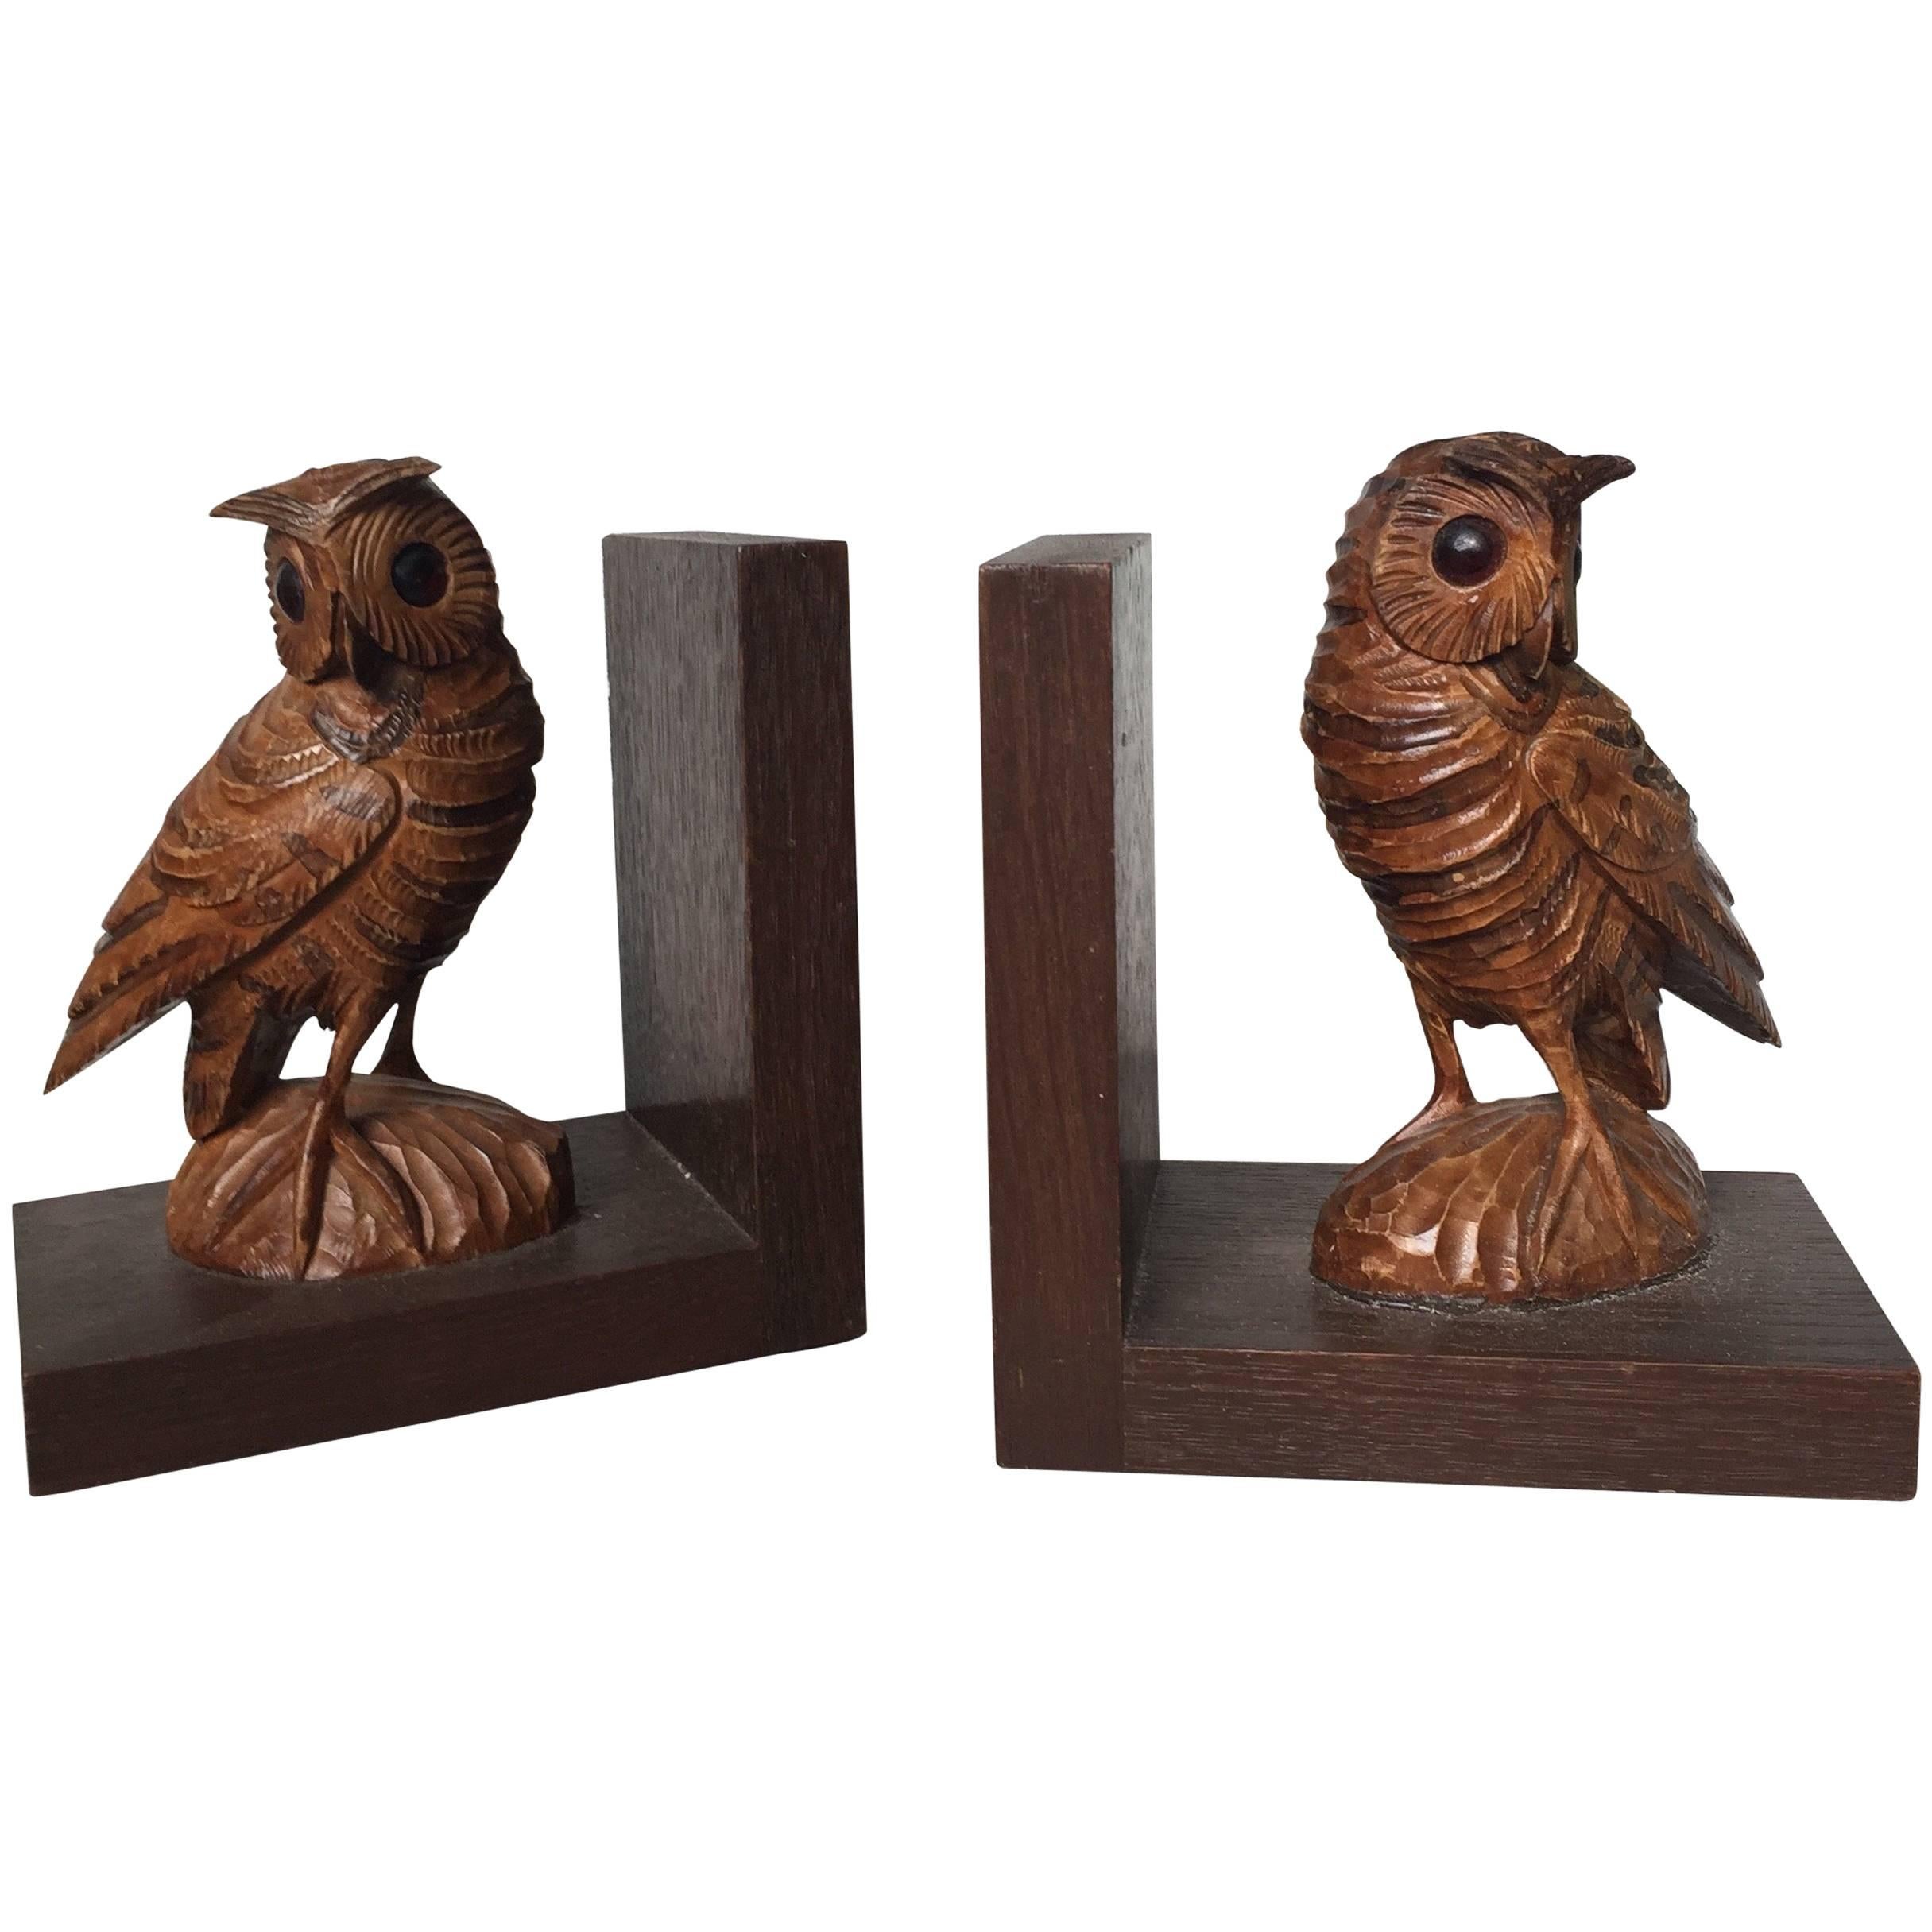 Highly Decorative Pair of Mid-20th Century Quality Carved Owl Bookends